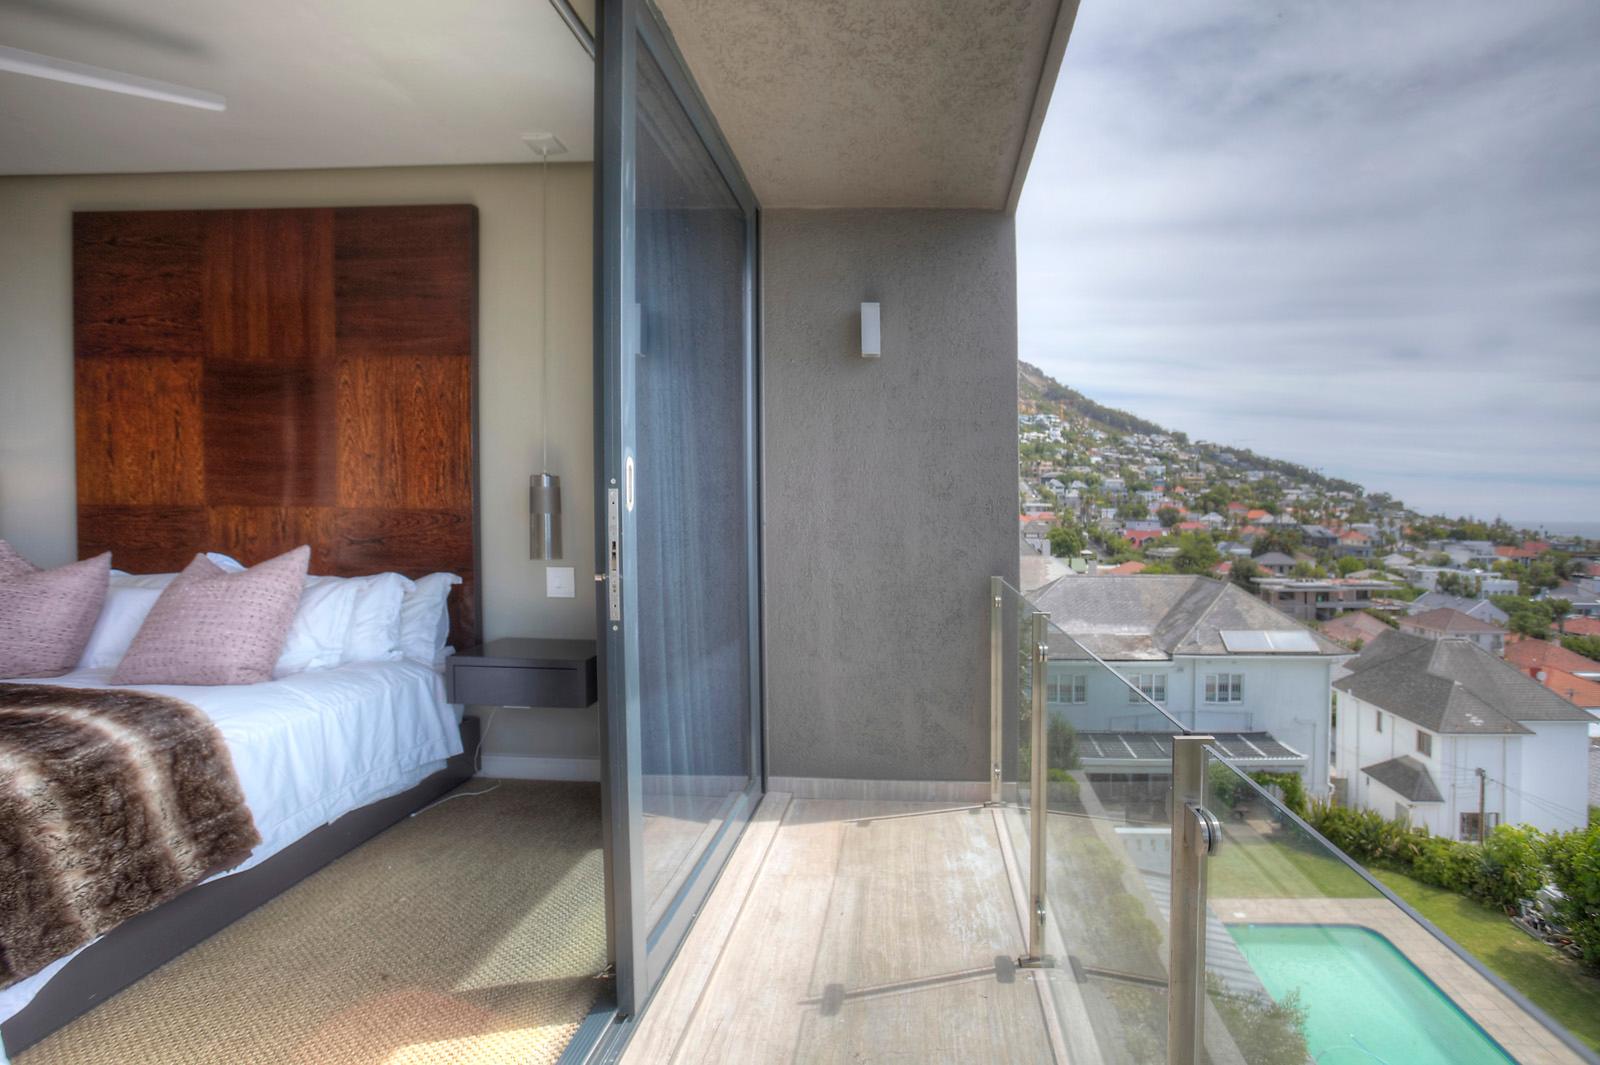 Photo 18 of Bordeaux Villa accommodation in Fresnaye, Cape Town with 4 bedrooms and 3.5 bathrooms